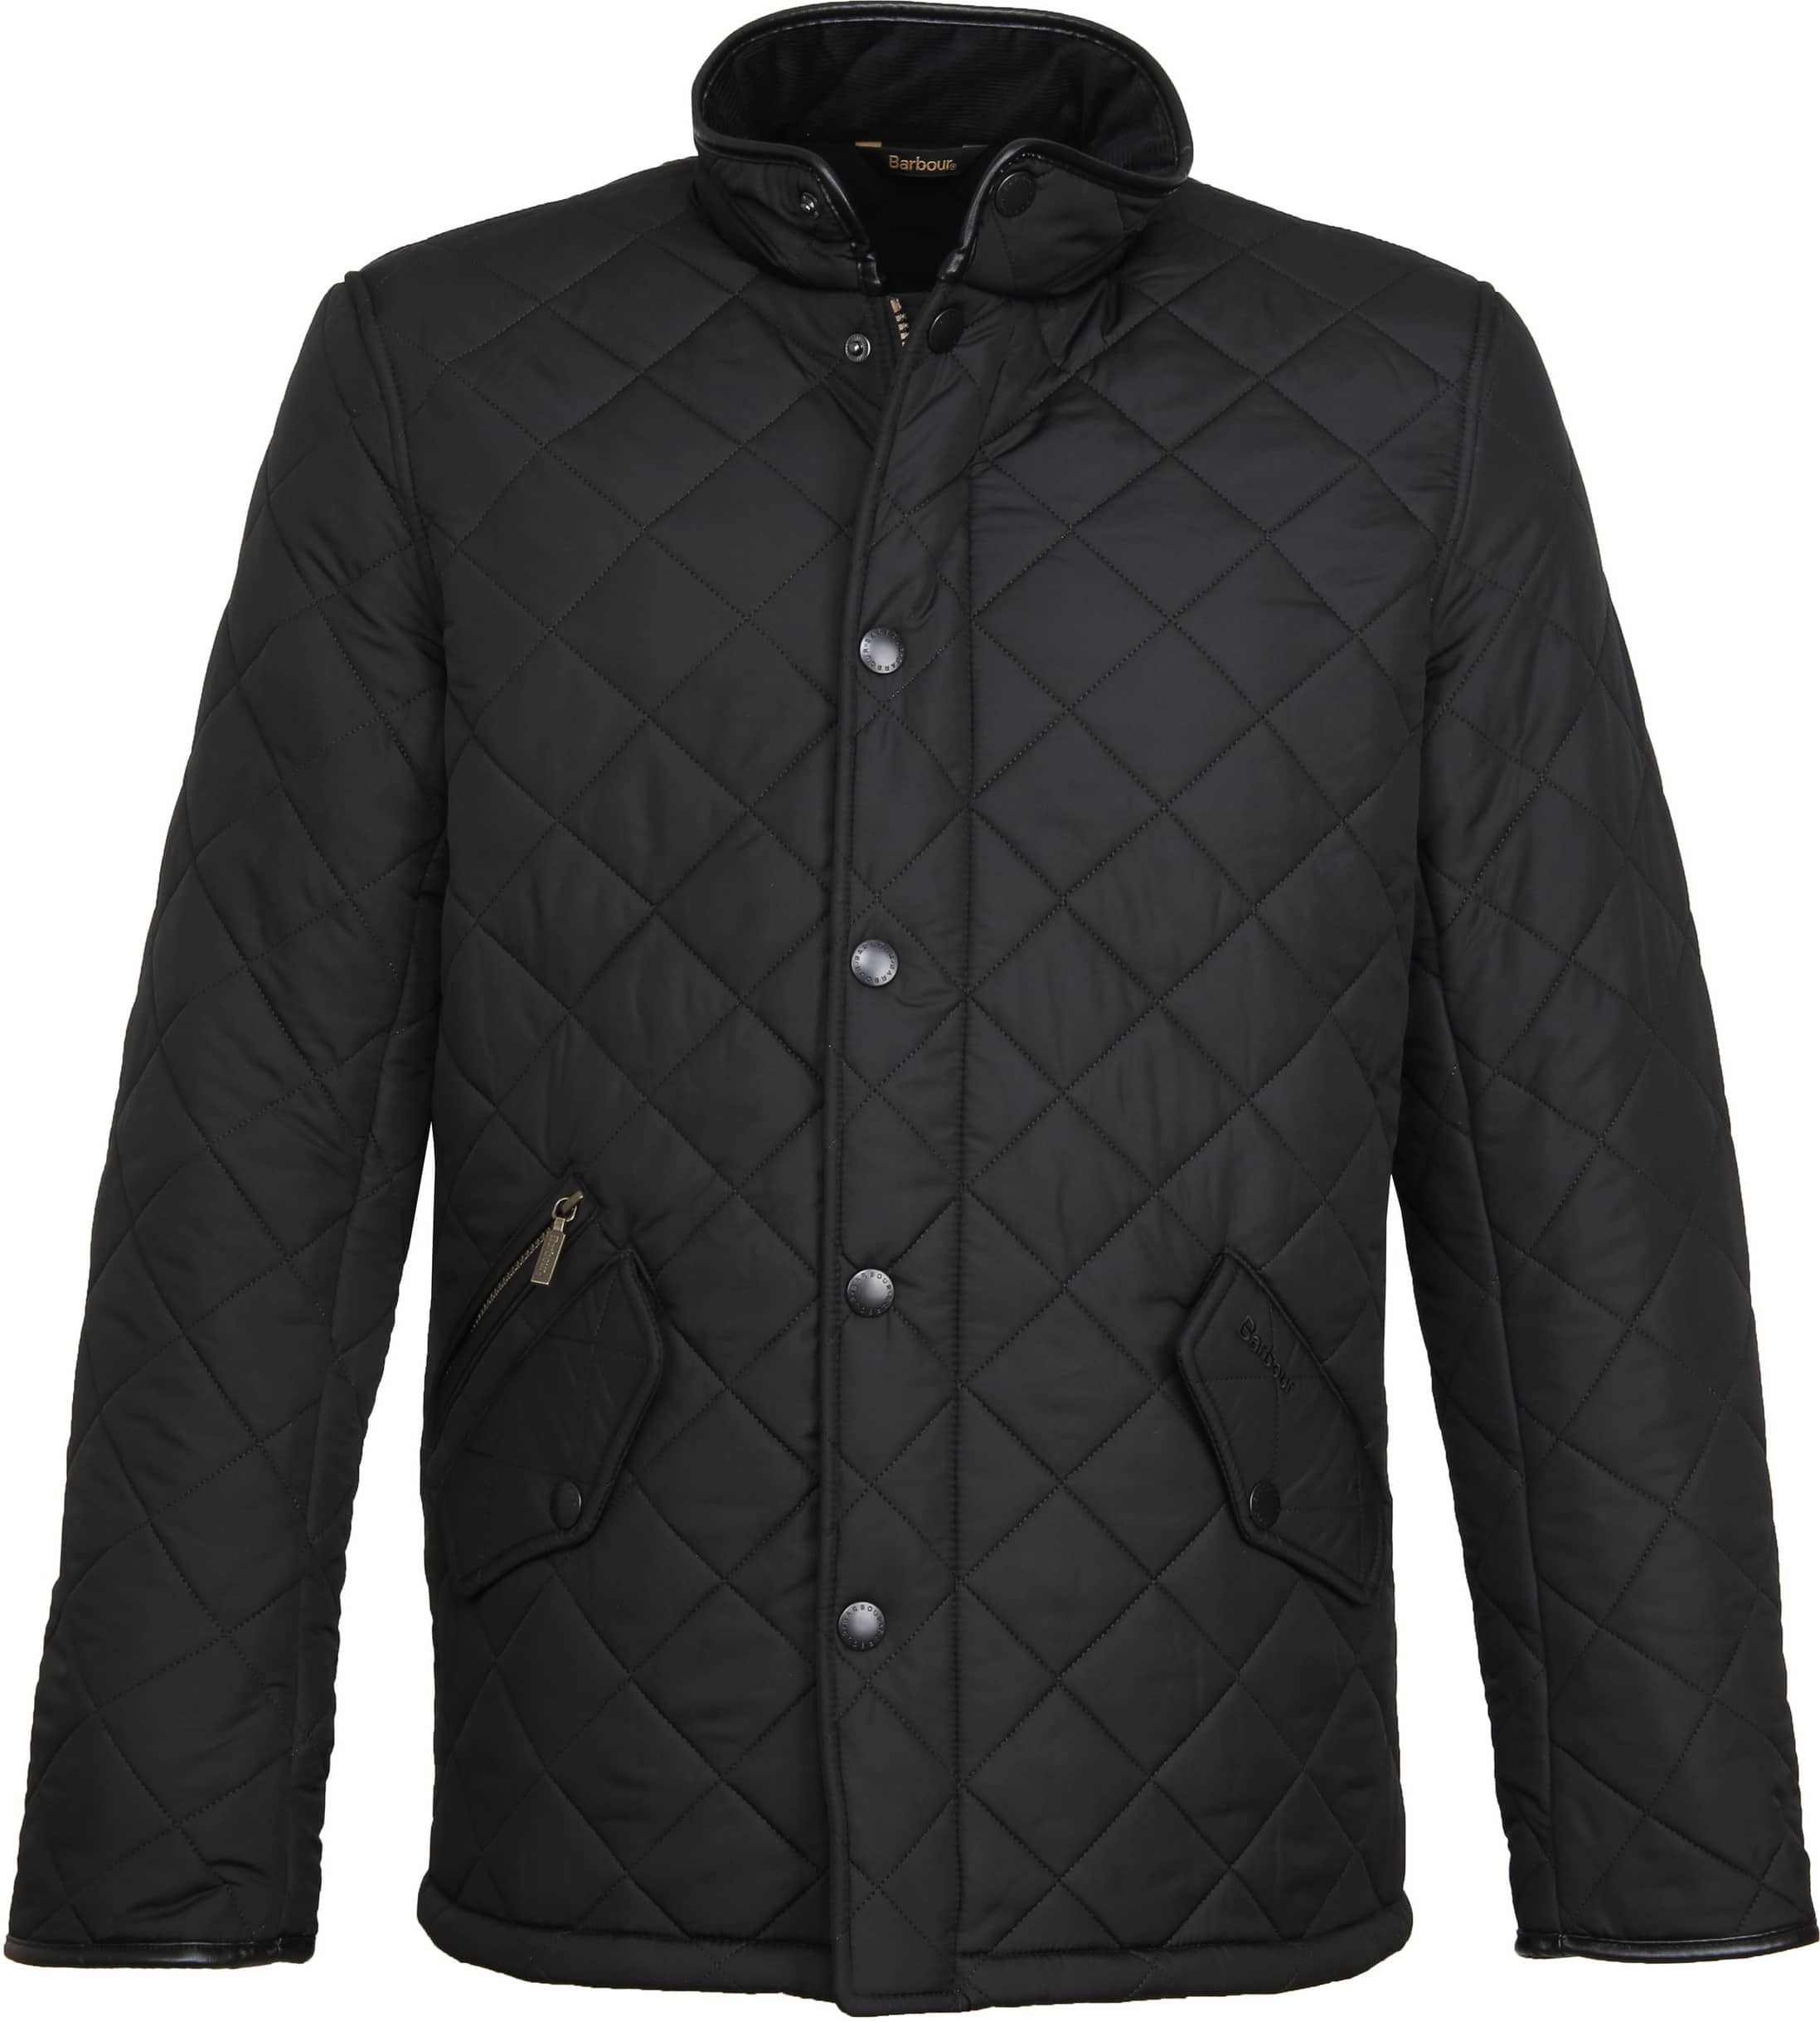 Barbour Quilted Jacket Powell Black size M